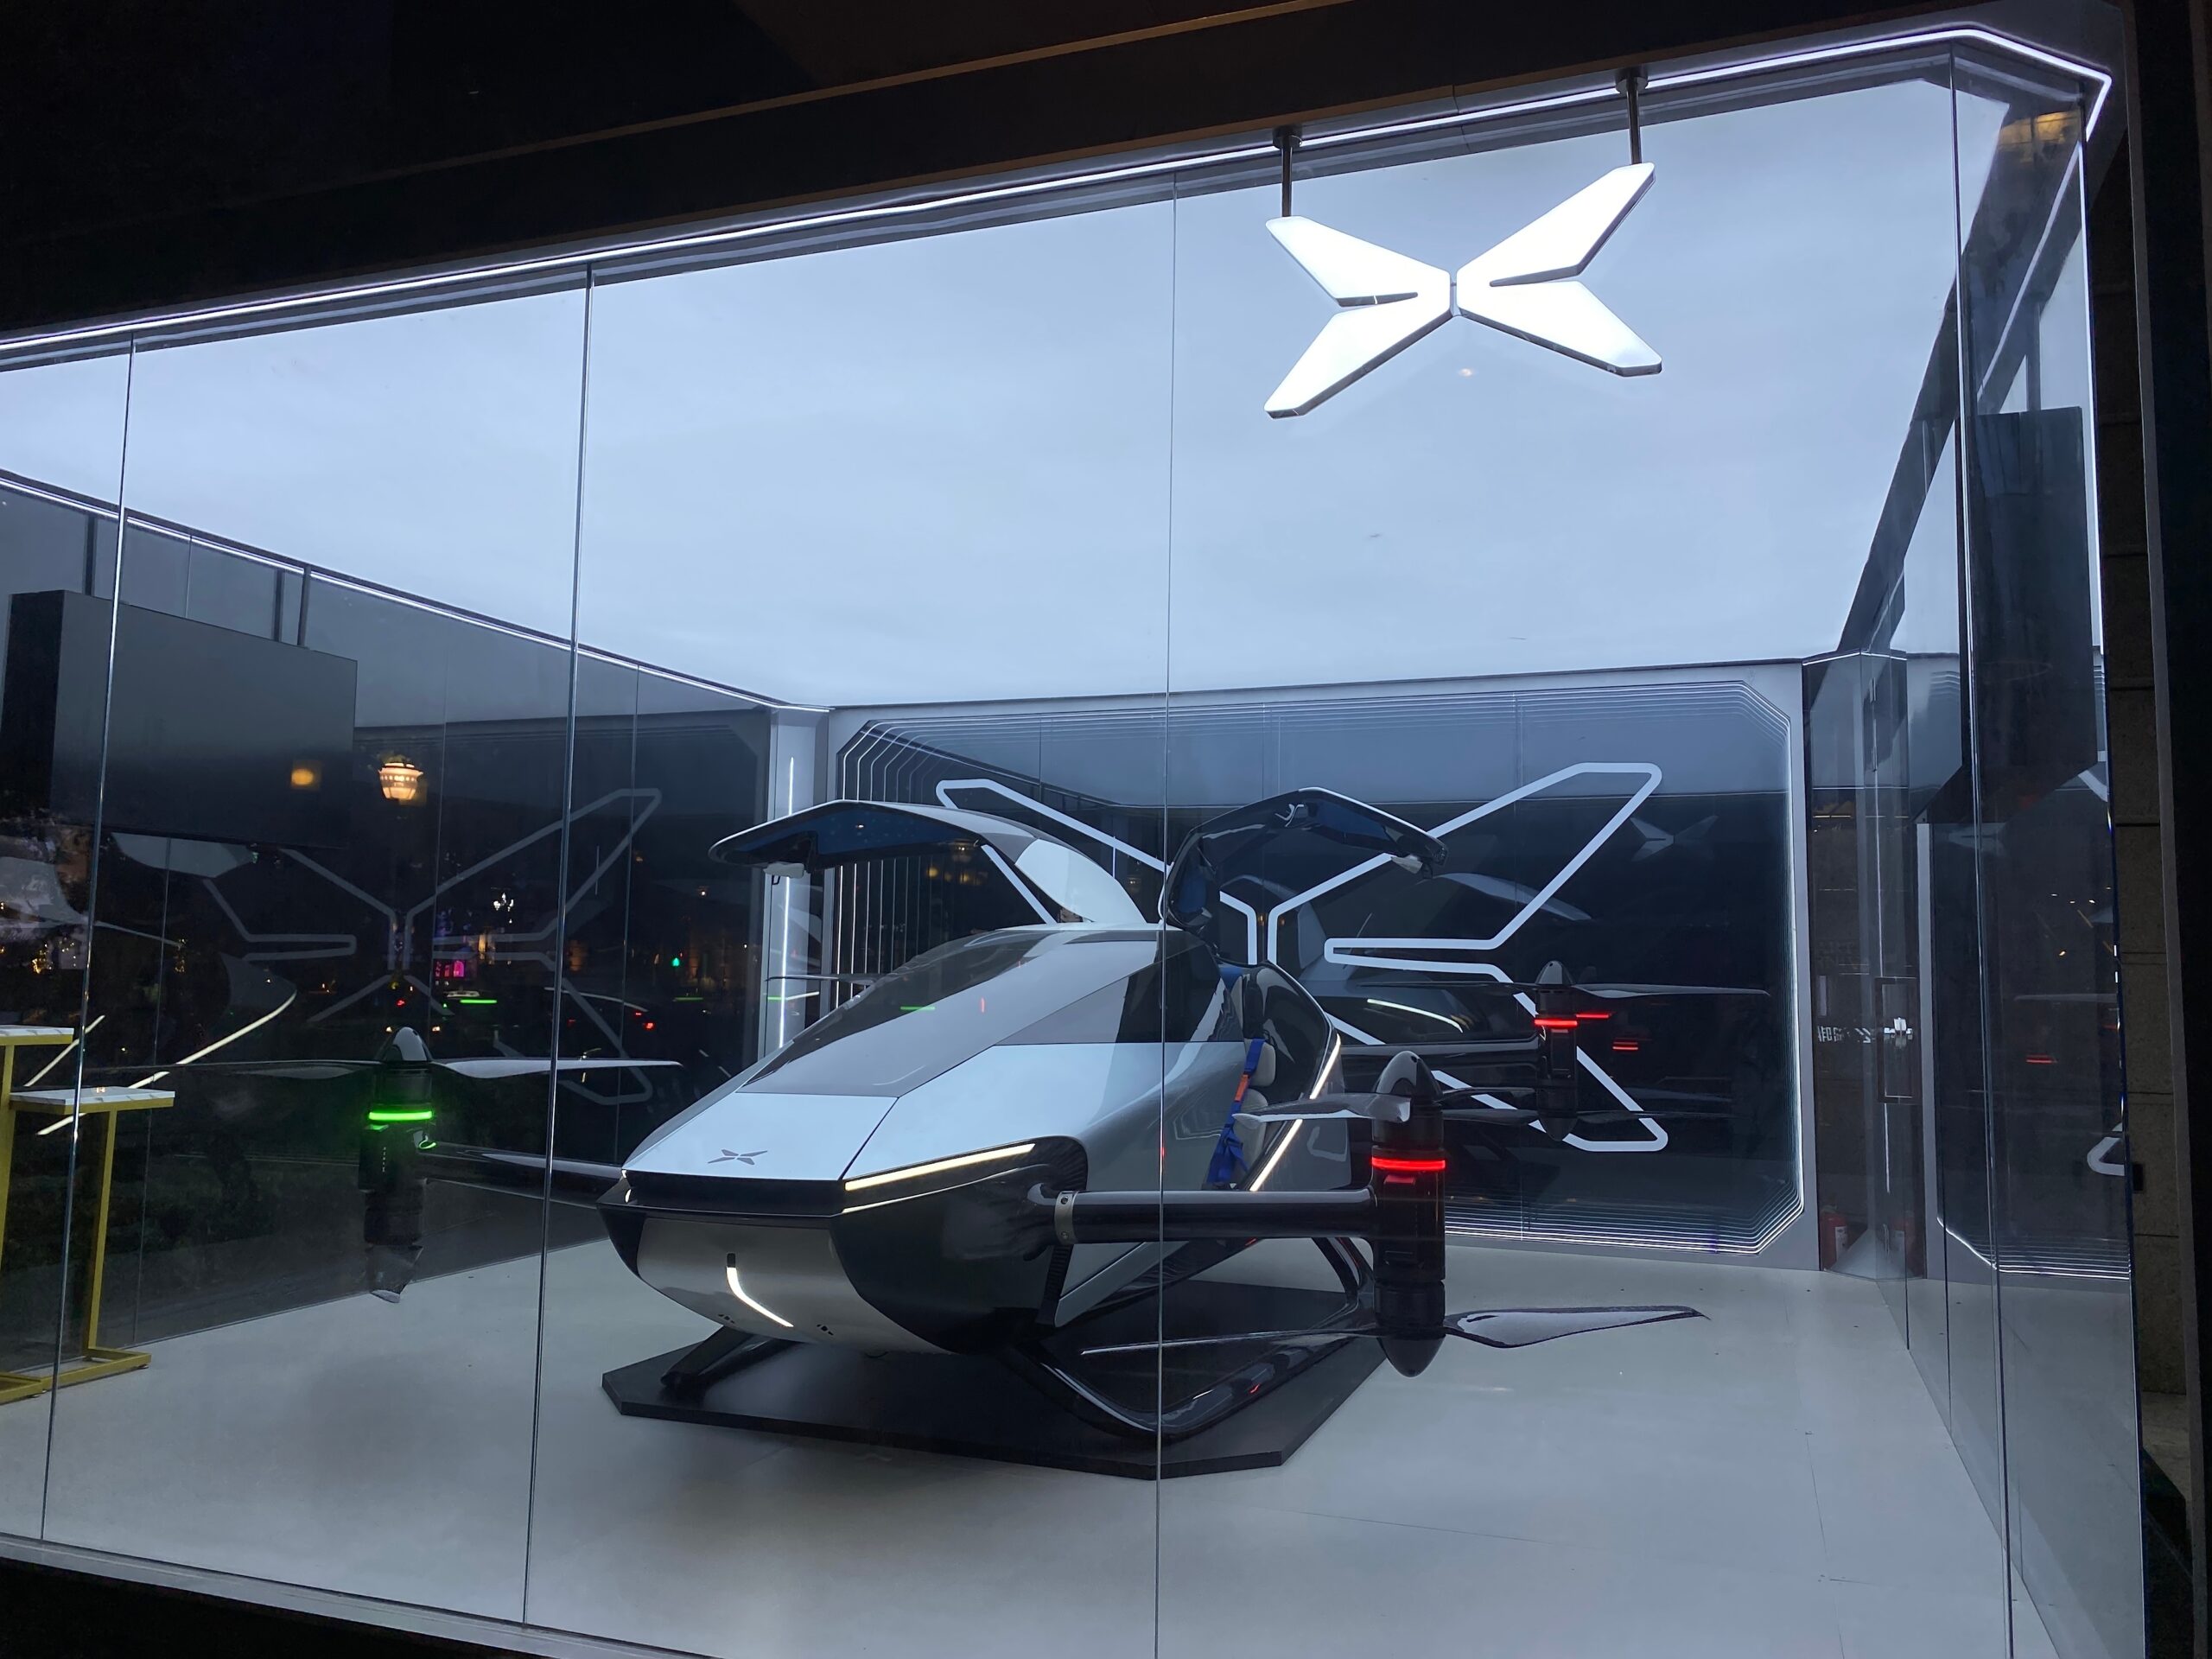 Alef’s Flying Car Preorders Soar to 2,850, Setting a New Record in Aviation